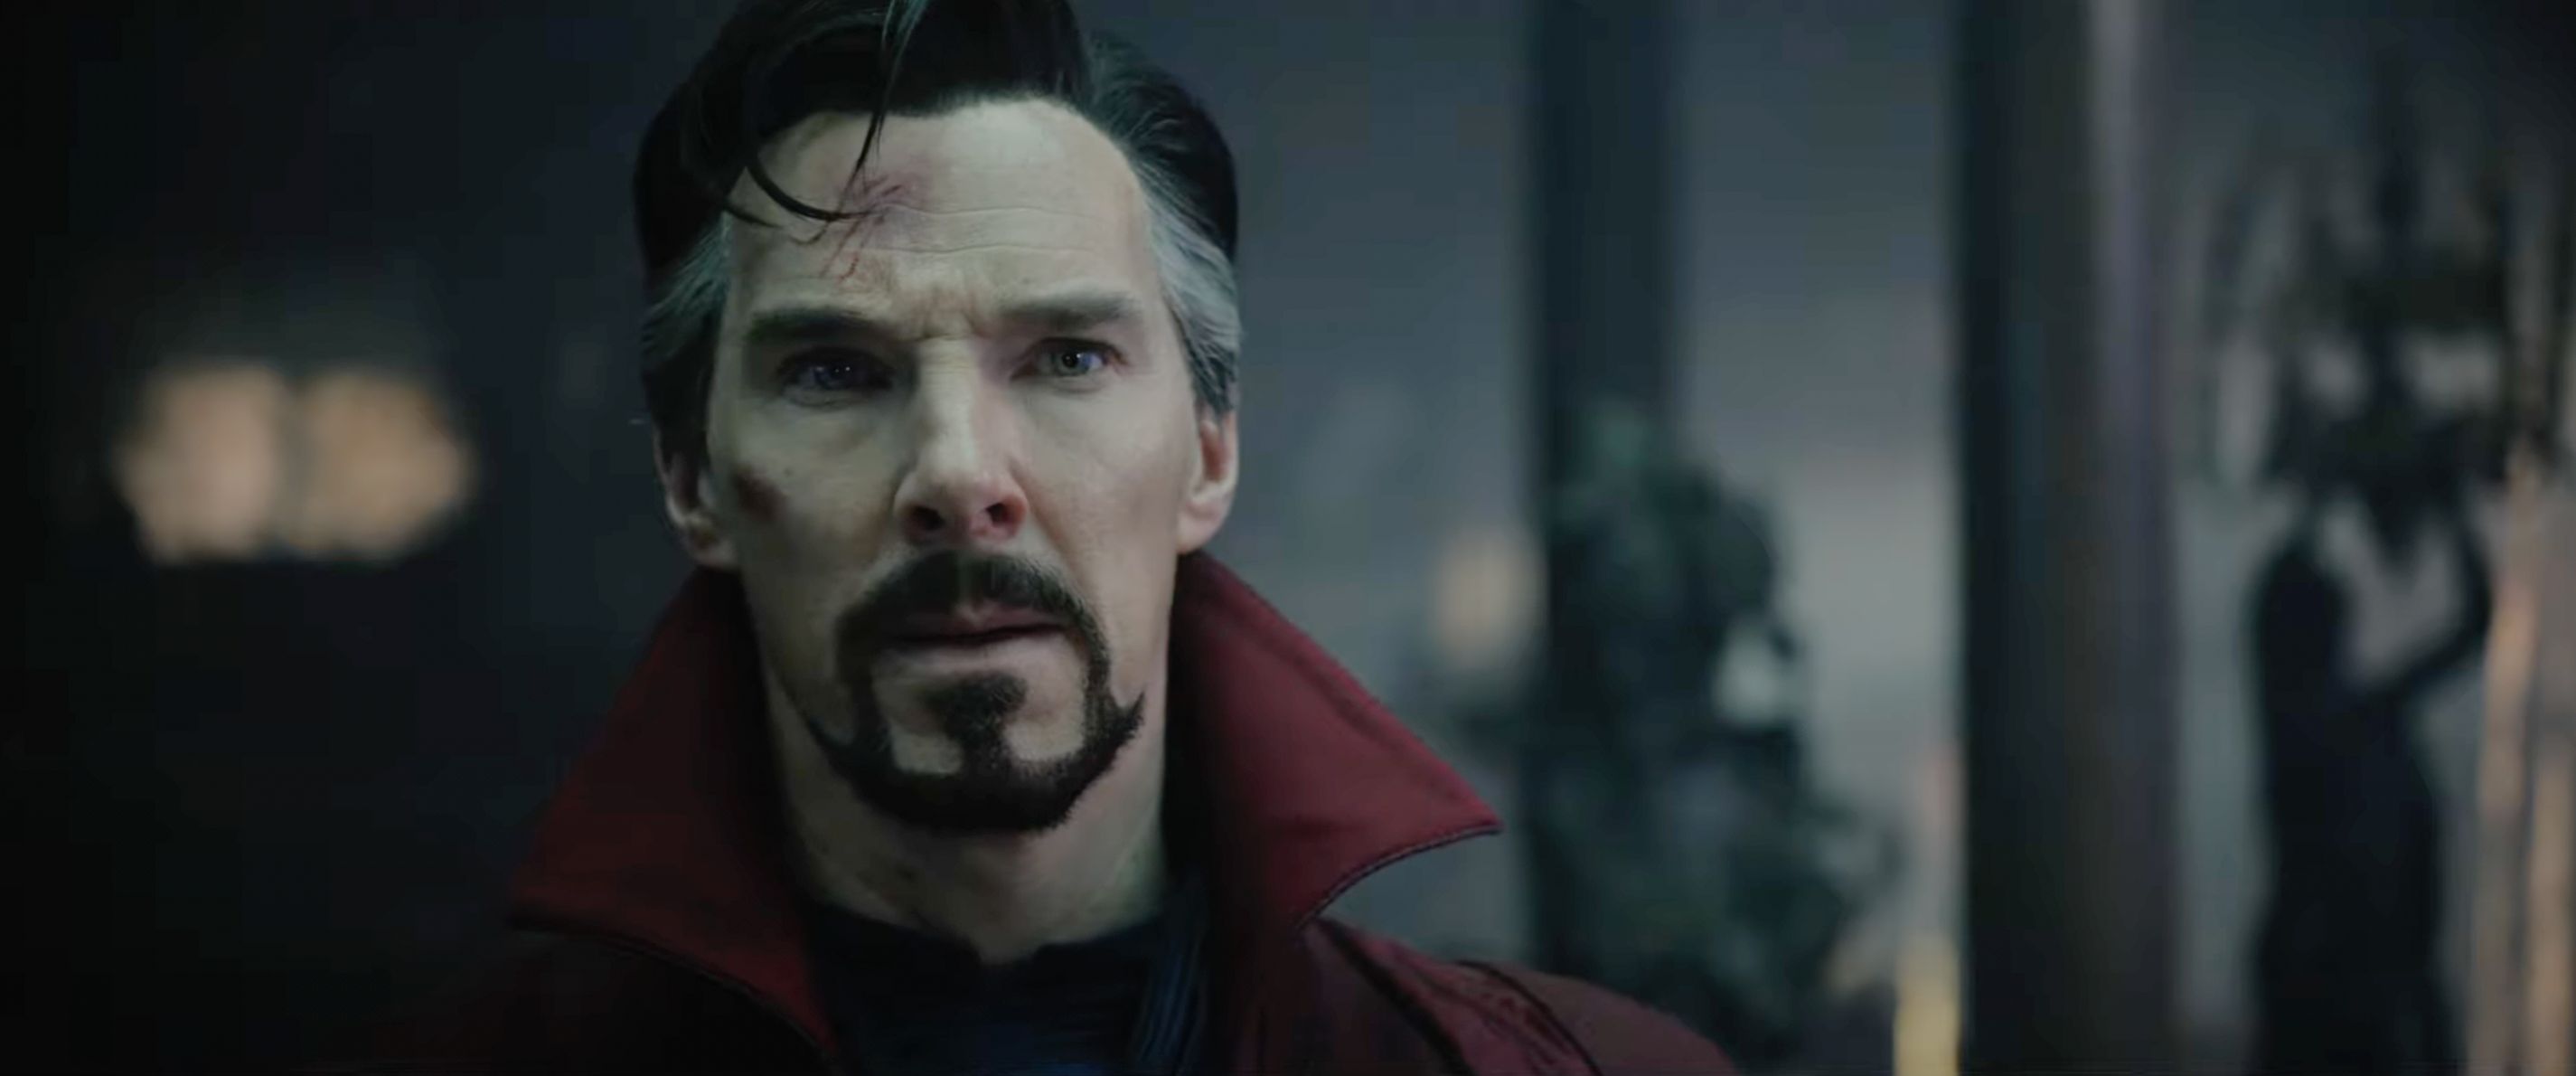 let me watch this watch dr strange 2016 online free